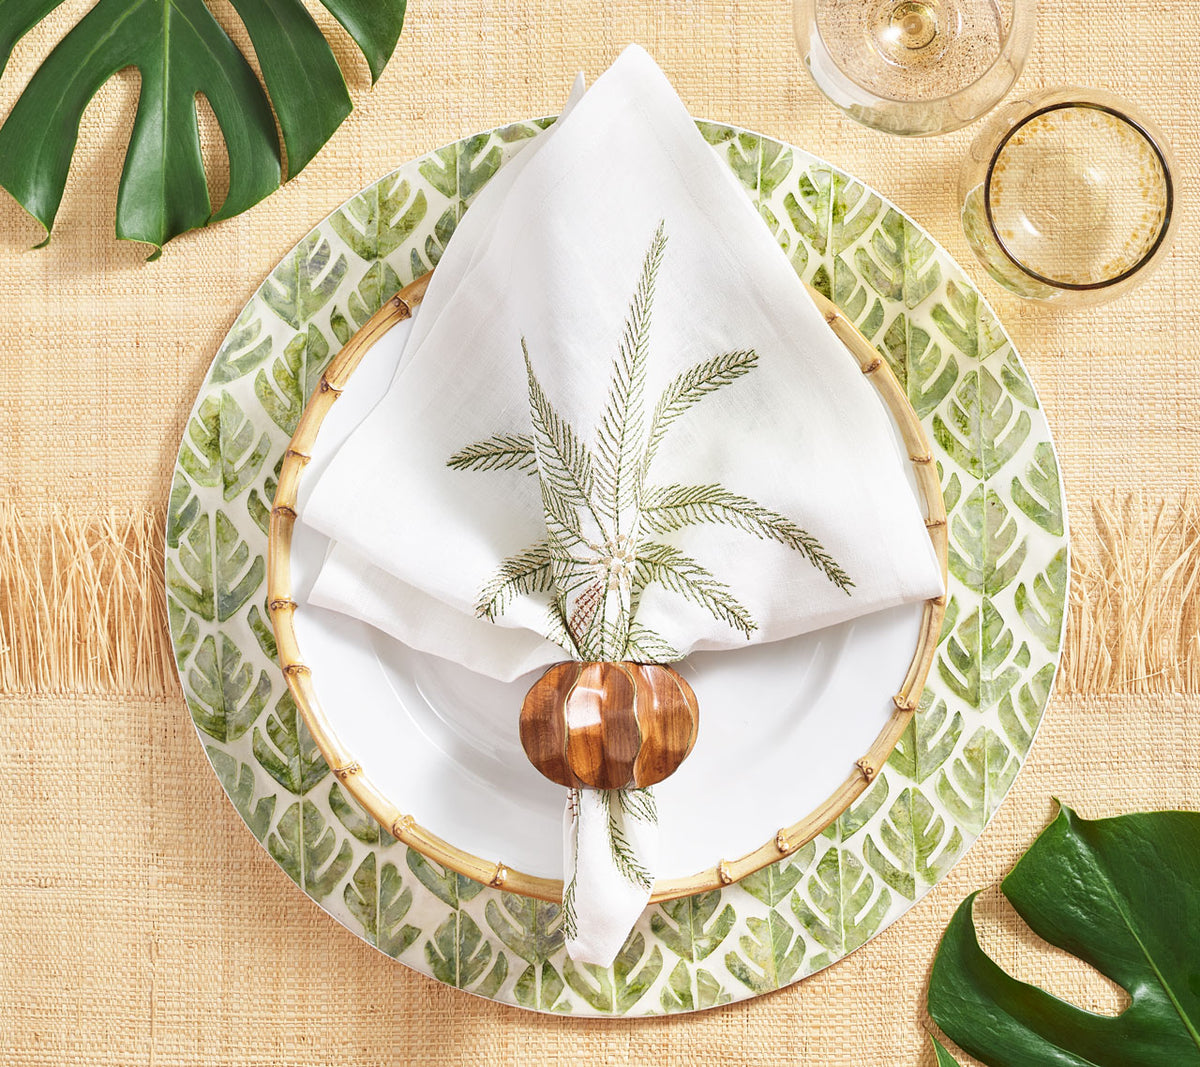 Round placemat with palms below a white Palm Coast Napkin with green & gold palm frond